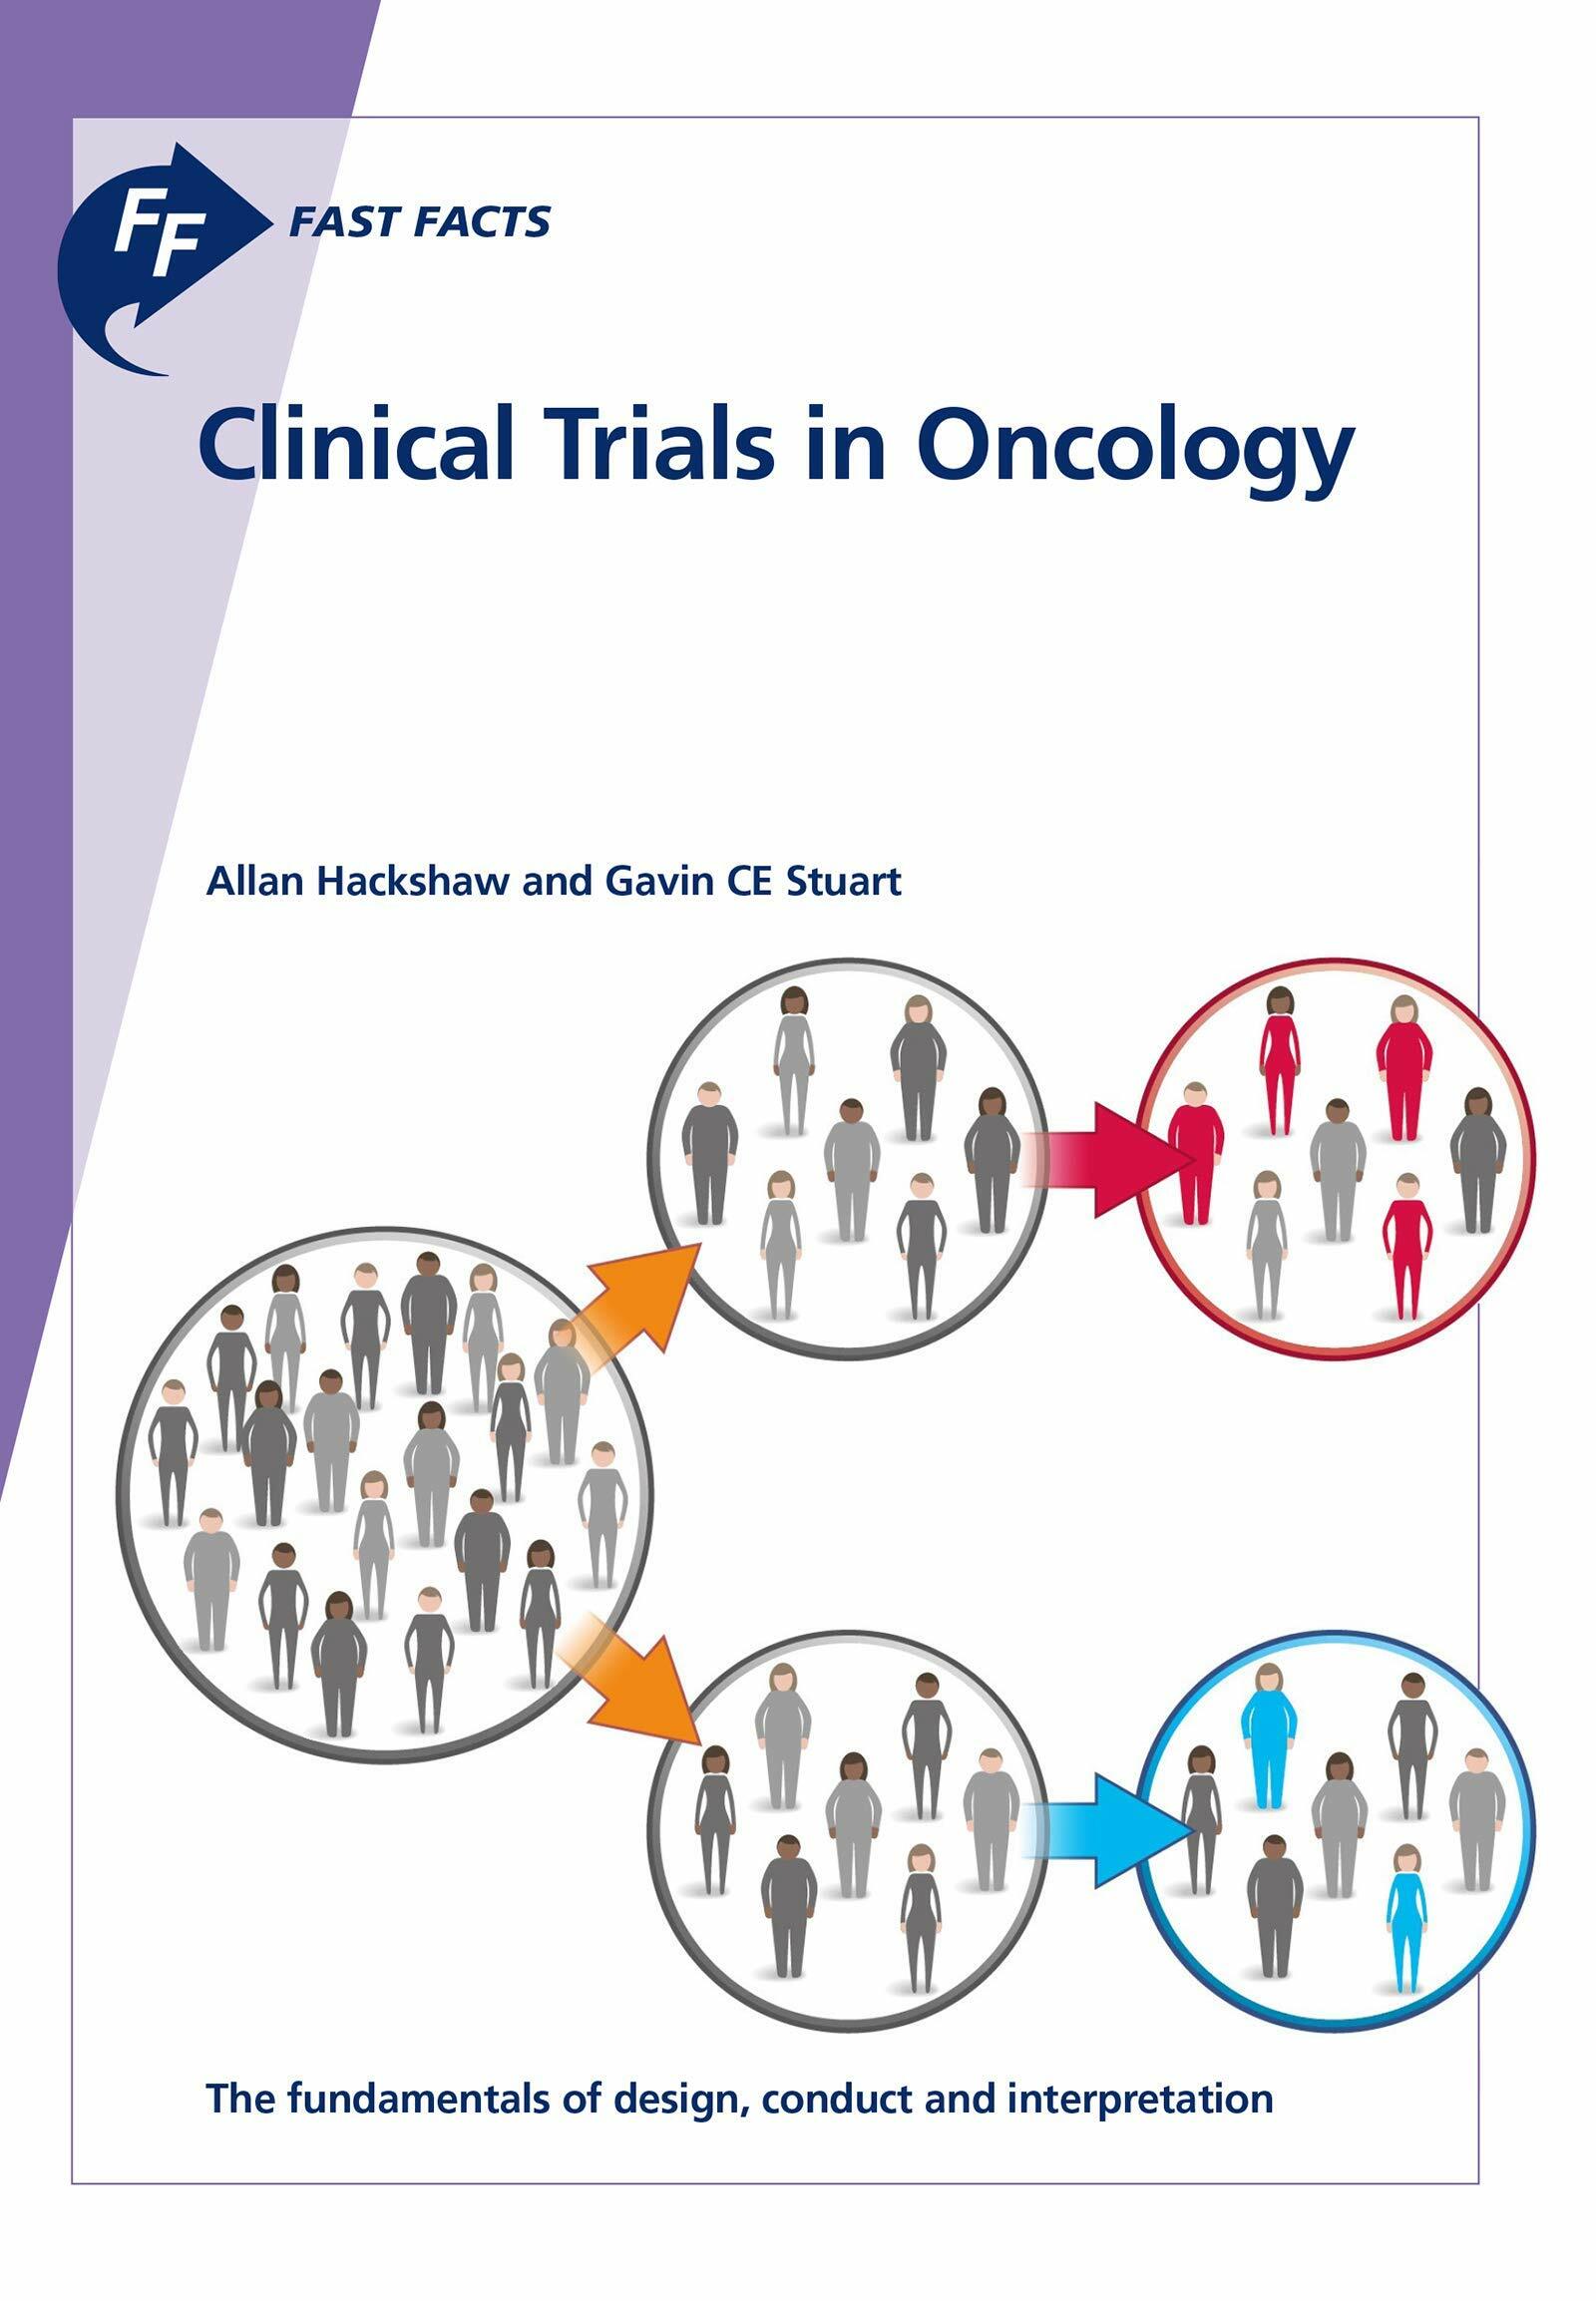 Fast Facts: Clinical Trials in Oncology (Paperback)